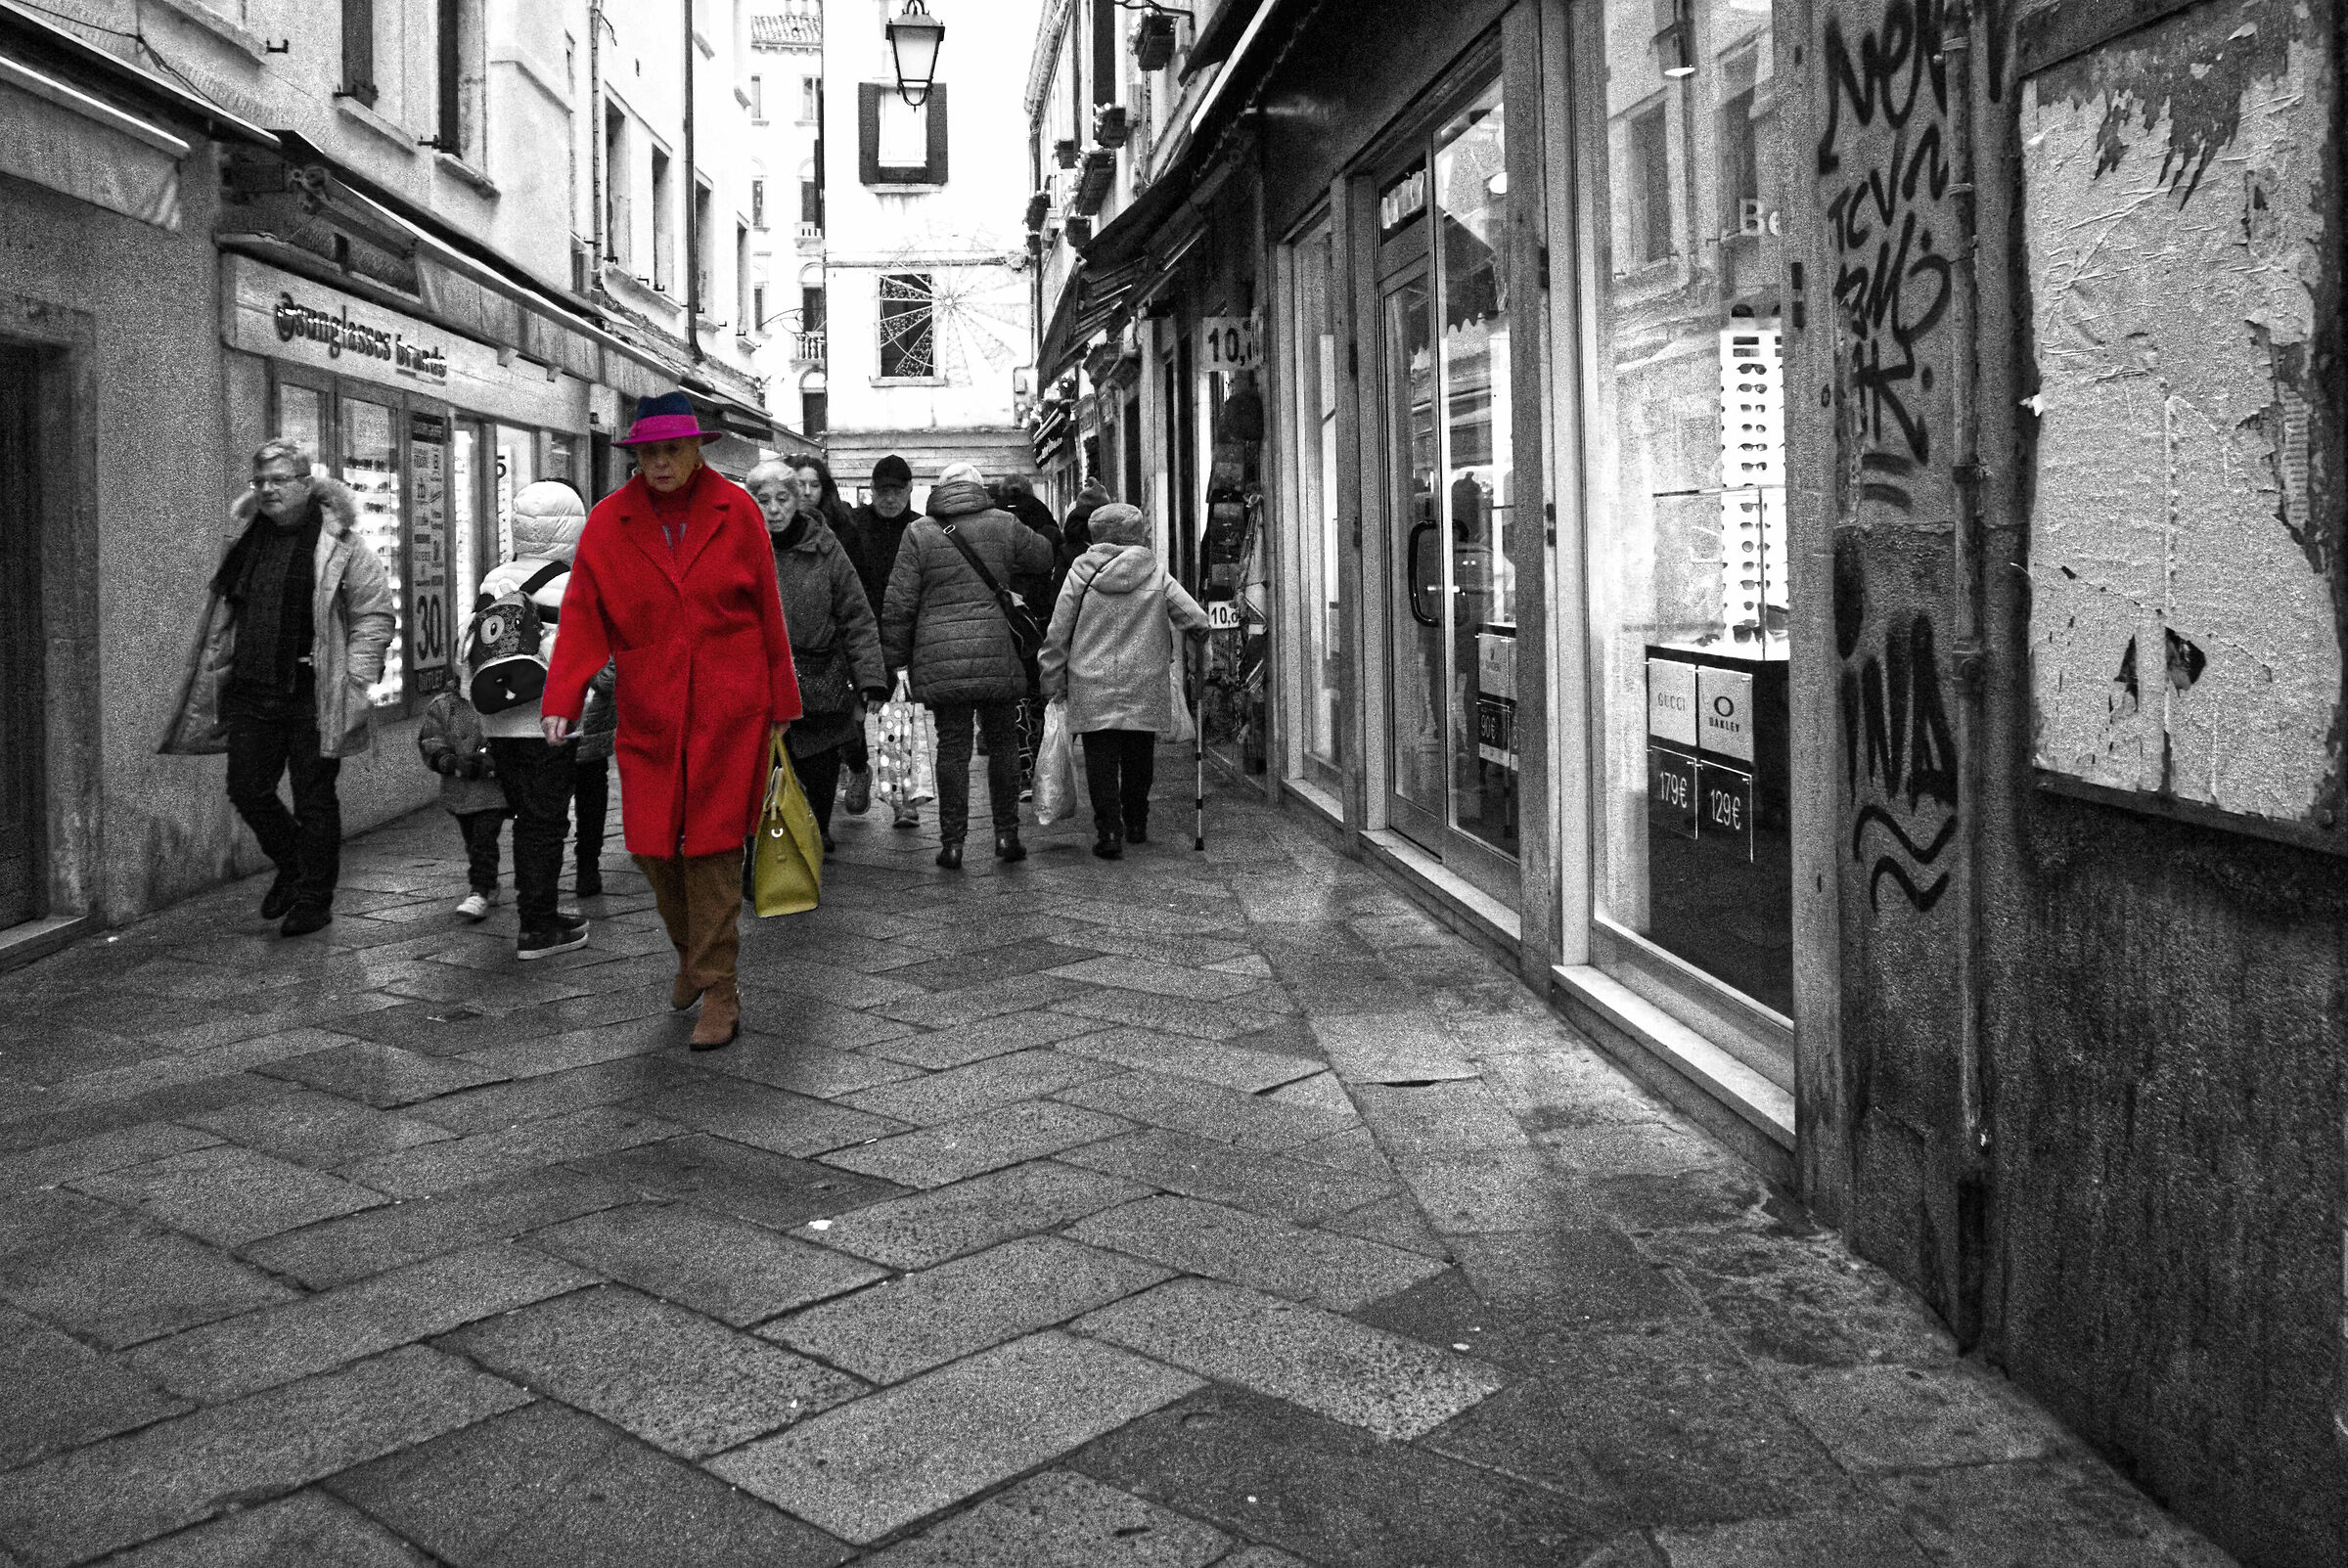 The red coat intrigued me...